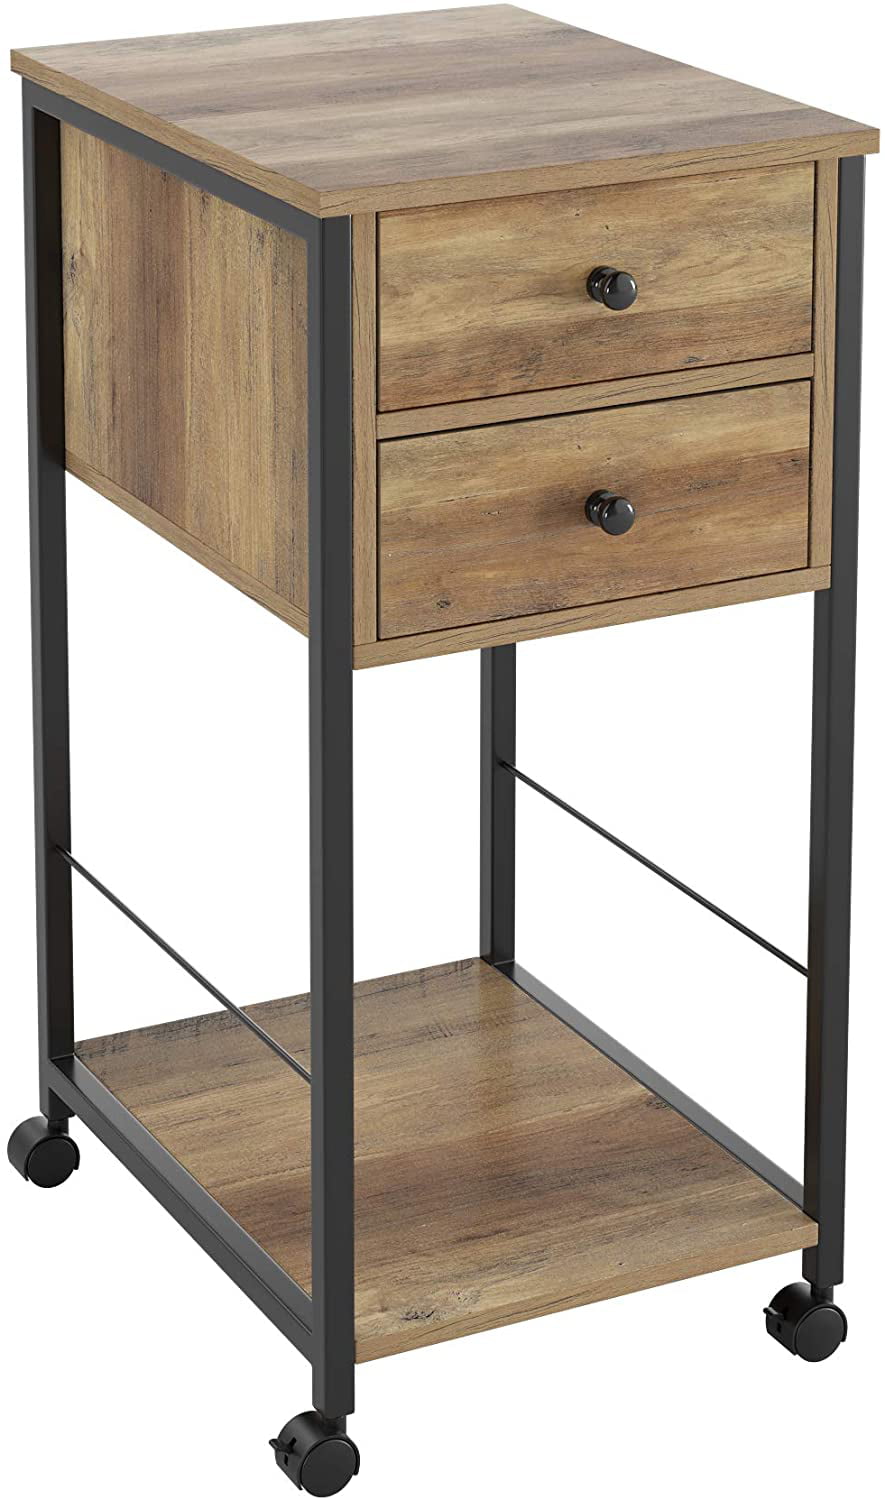 Hallway Joolihome Bedside Table Office Wooden Nightstand Lamp Desk with Handled Drawer and Open Front Shelf Storage Compartment Grey Sofa End Table for Home Living Room Bedroom